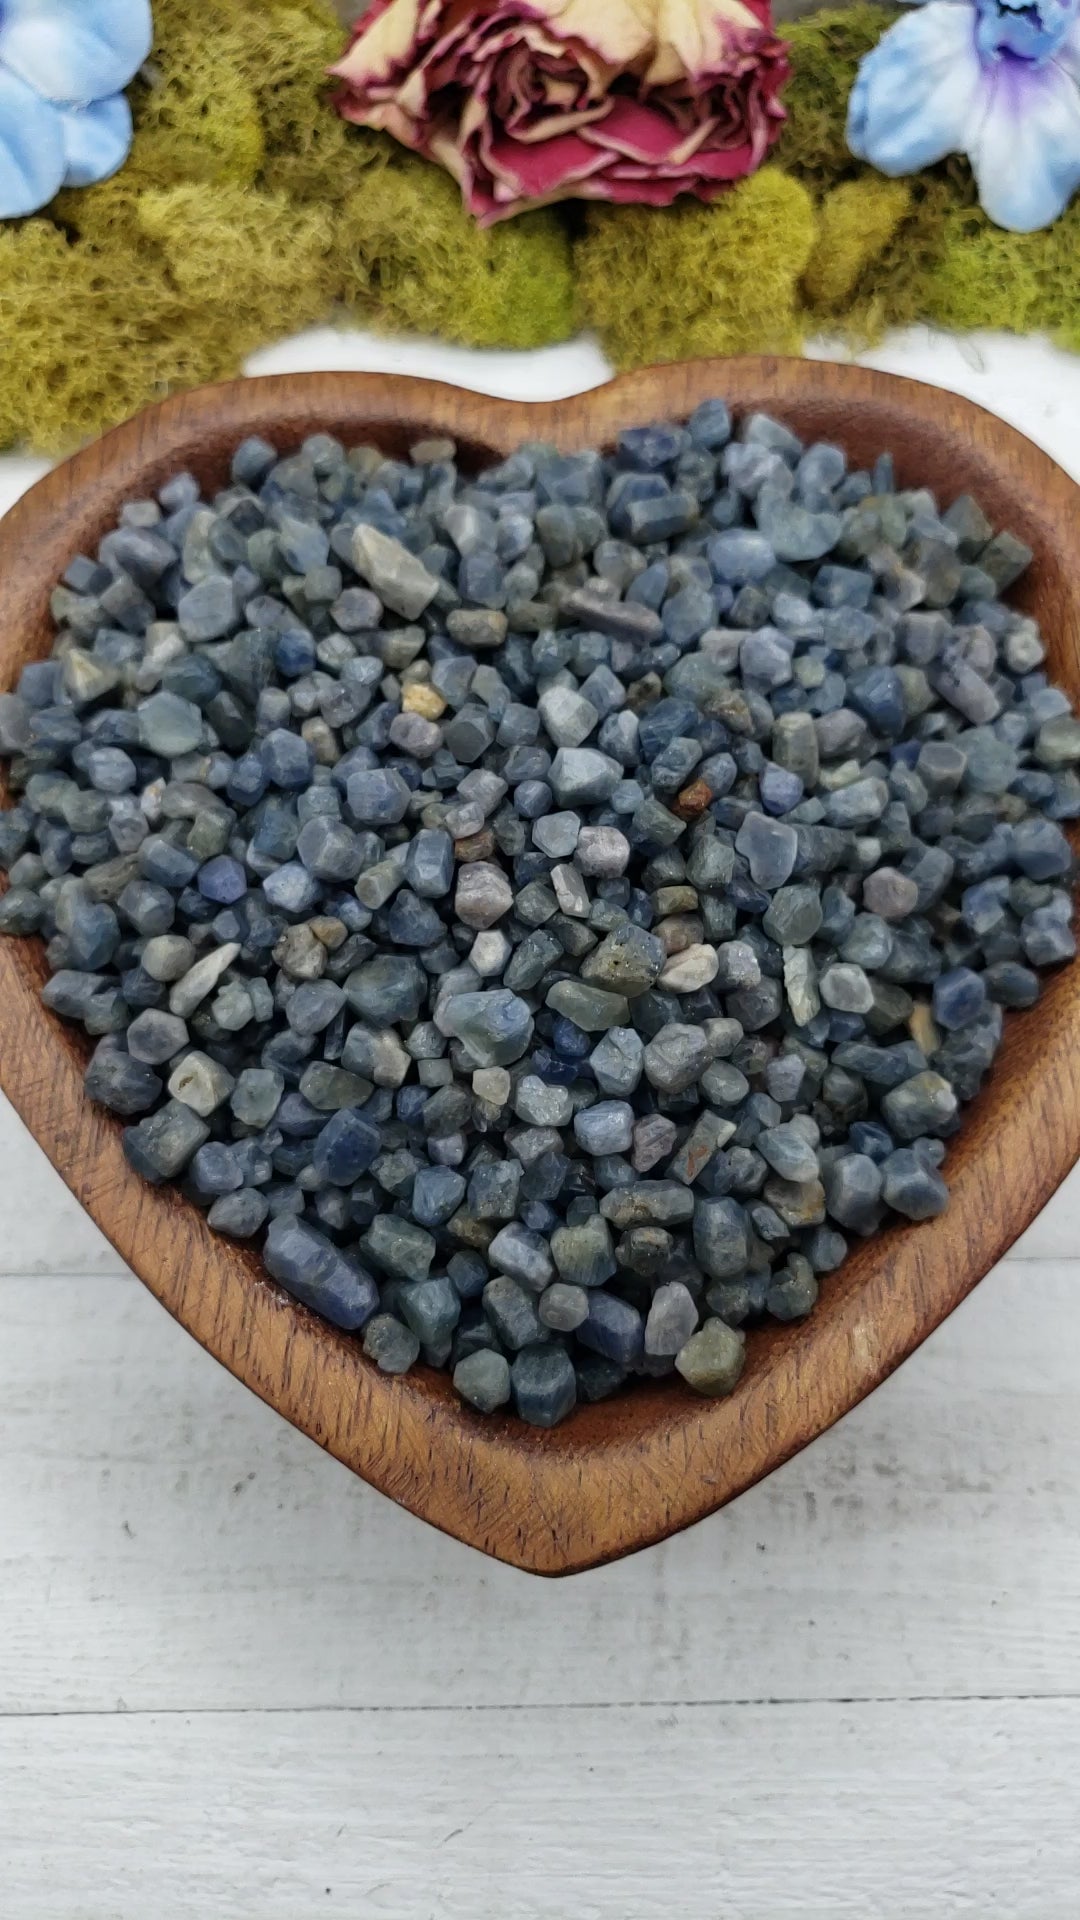 sapphire stones in heart-shaped bowl